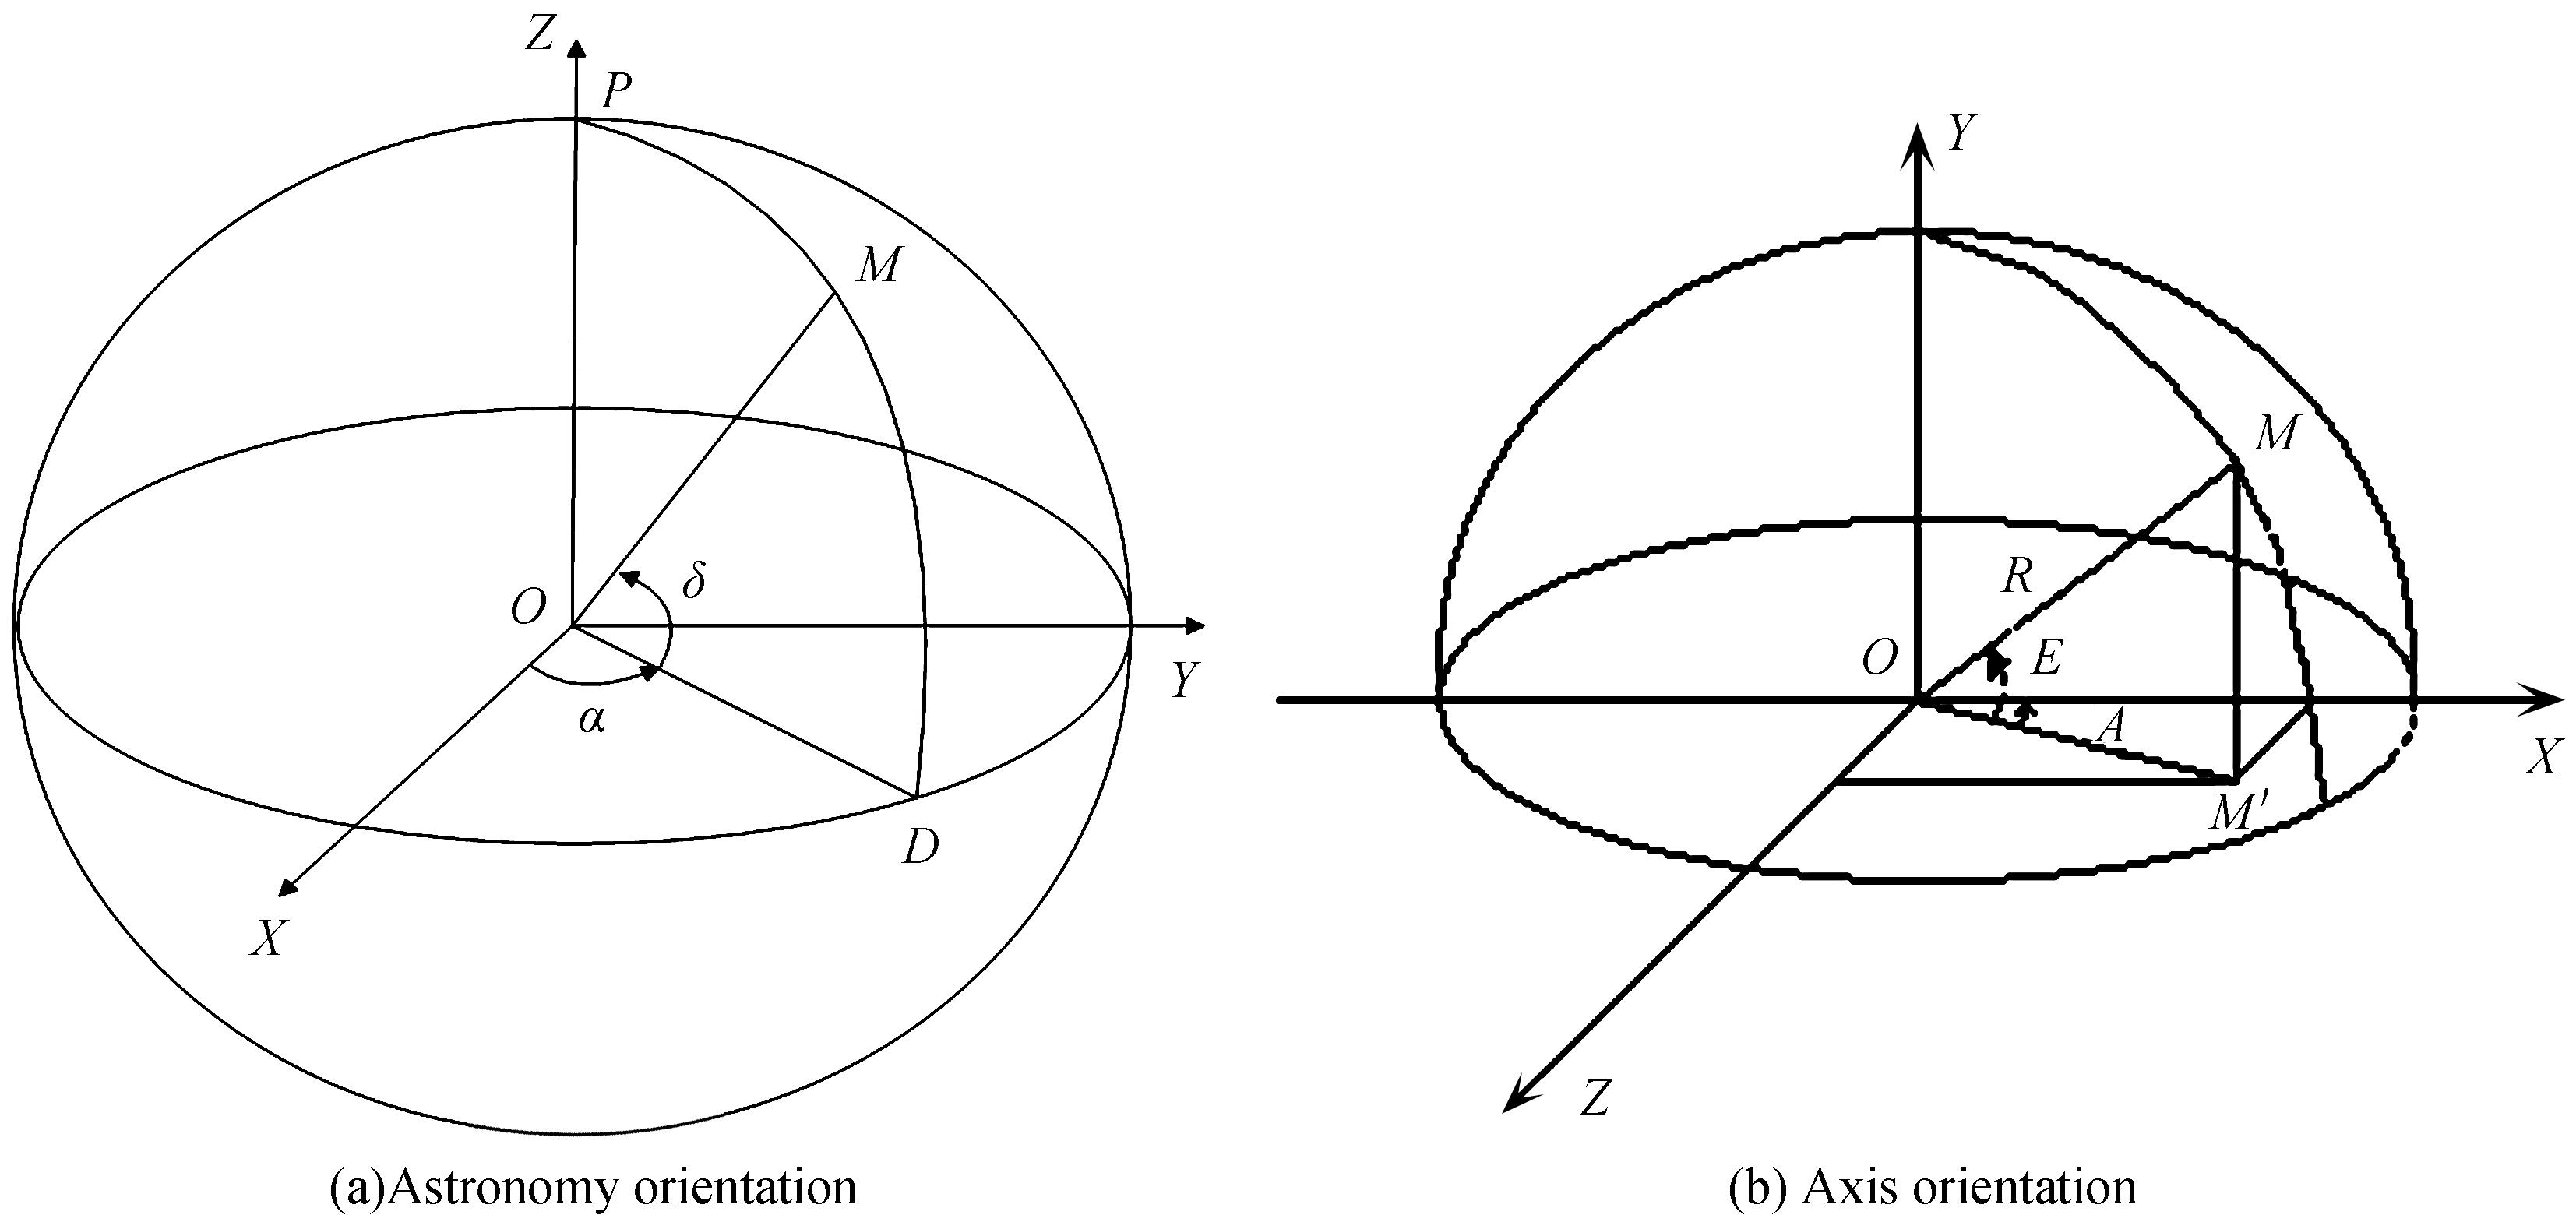 The theory of astronomy and axis orientation